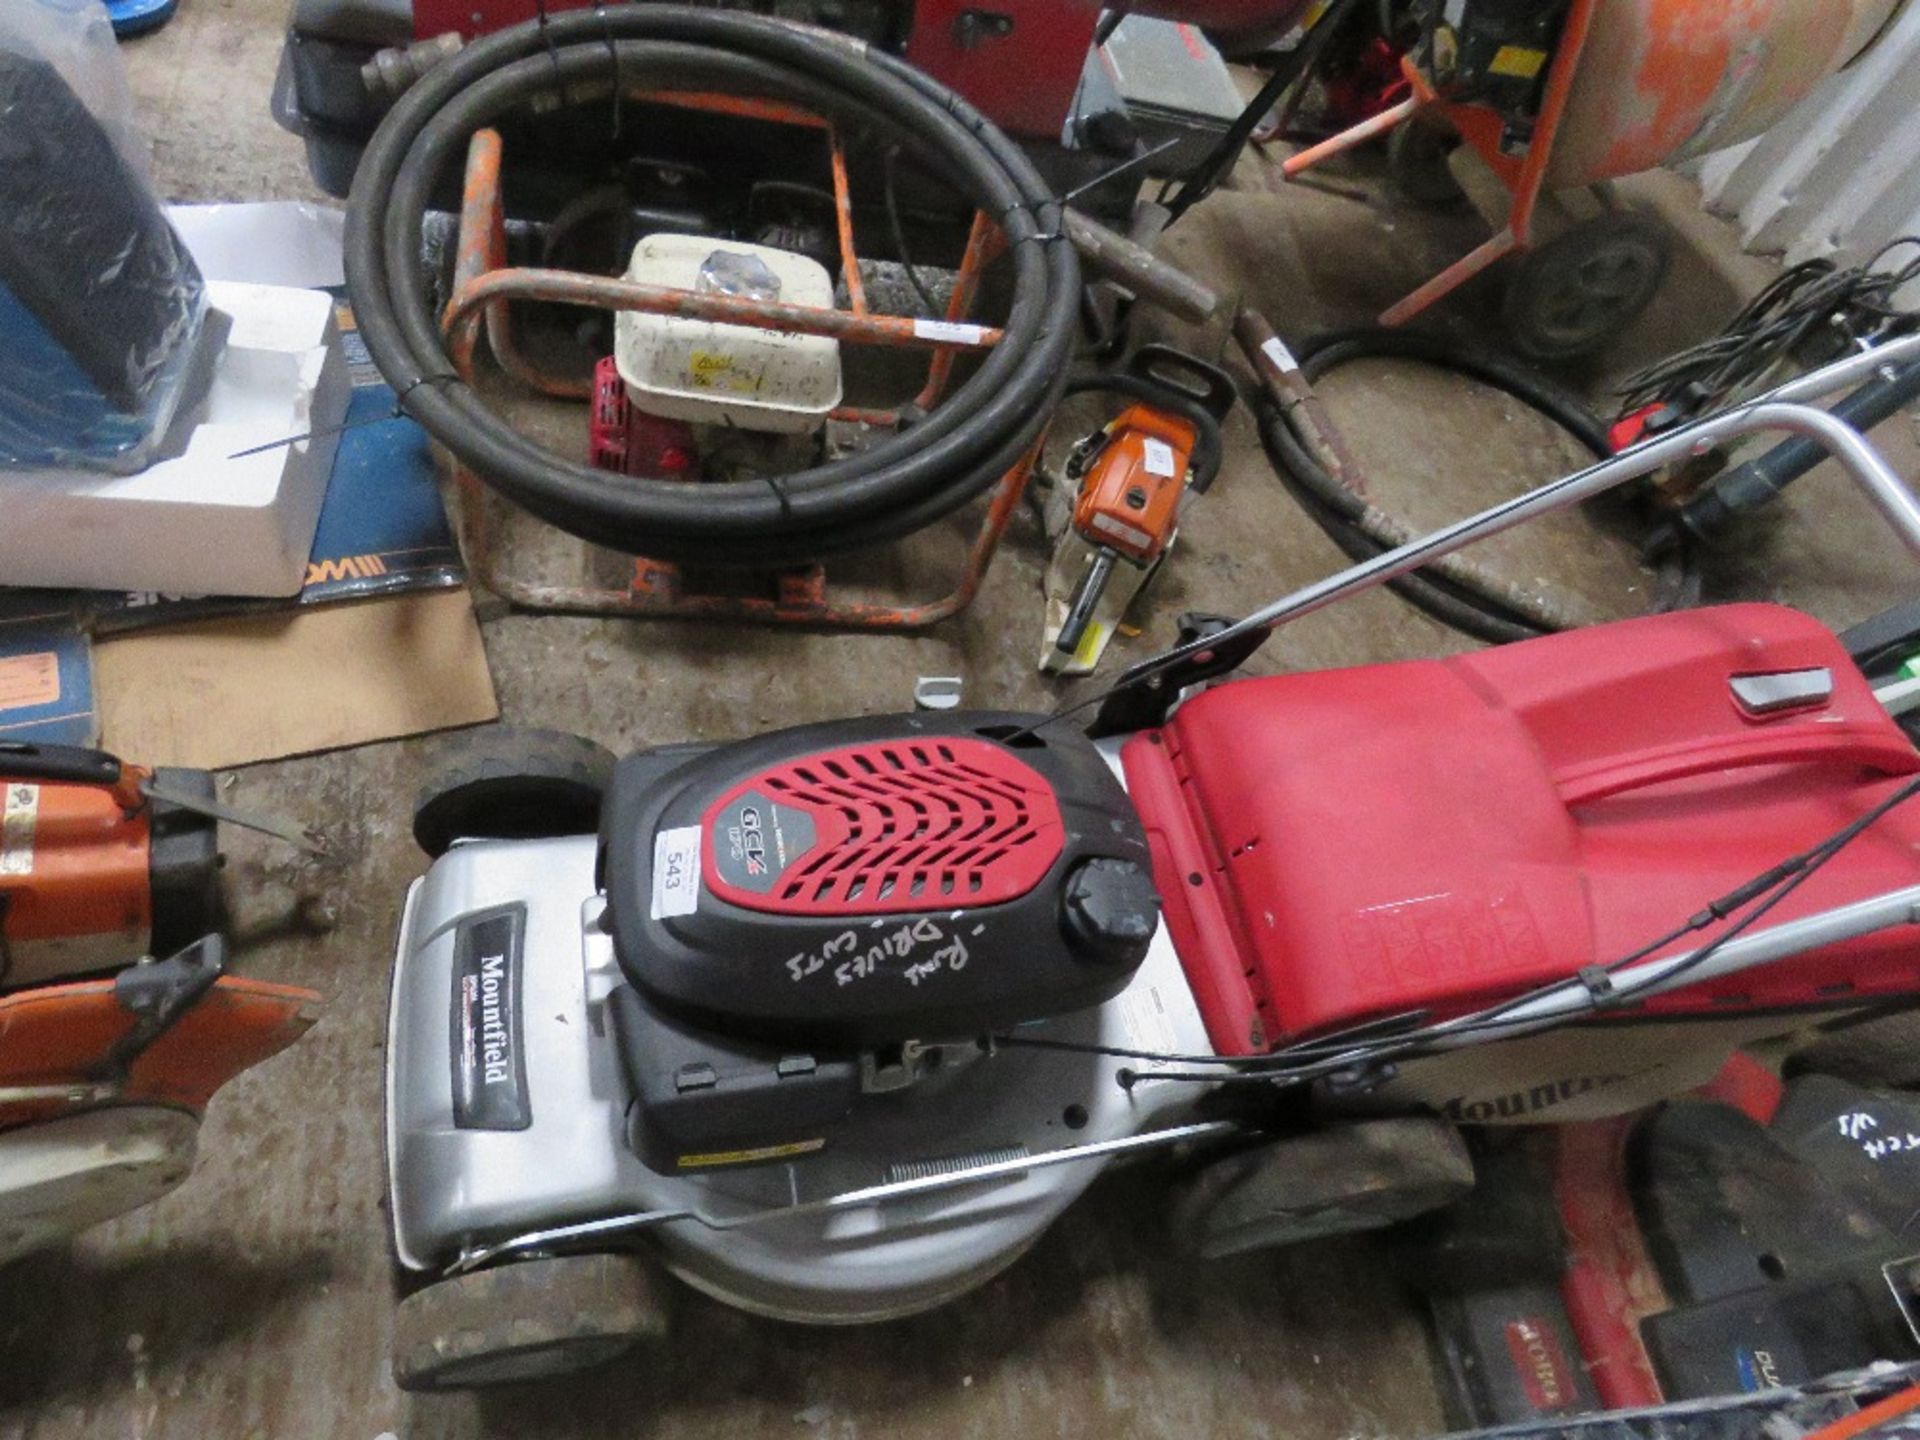 MOUNTFIELD SP53H PETROL DRIVEN LAWNMOWER. WHEN TESTED WAS SEEN TO RUN, DRIVE AND CUT. - Image 2 of 2